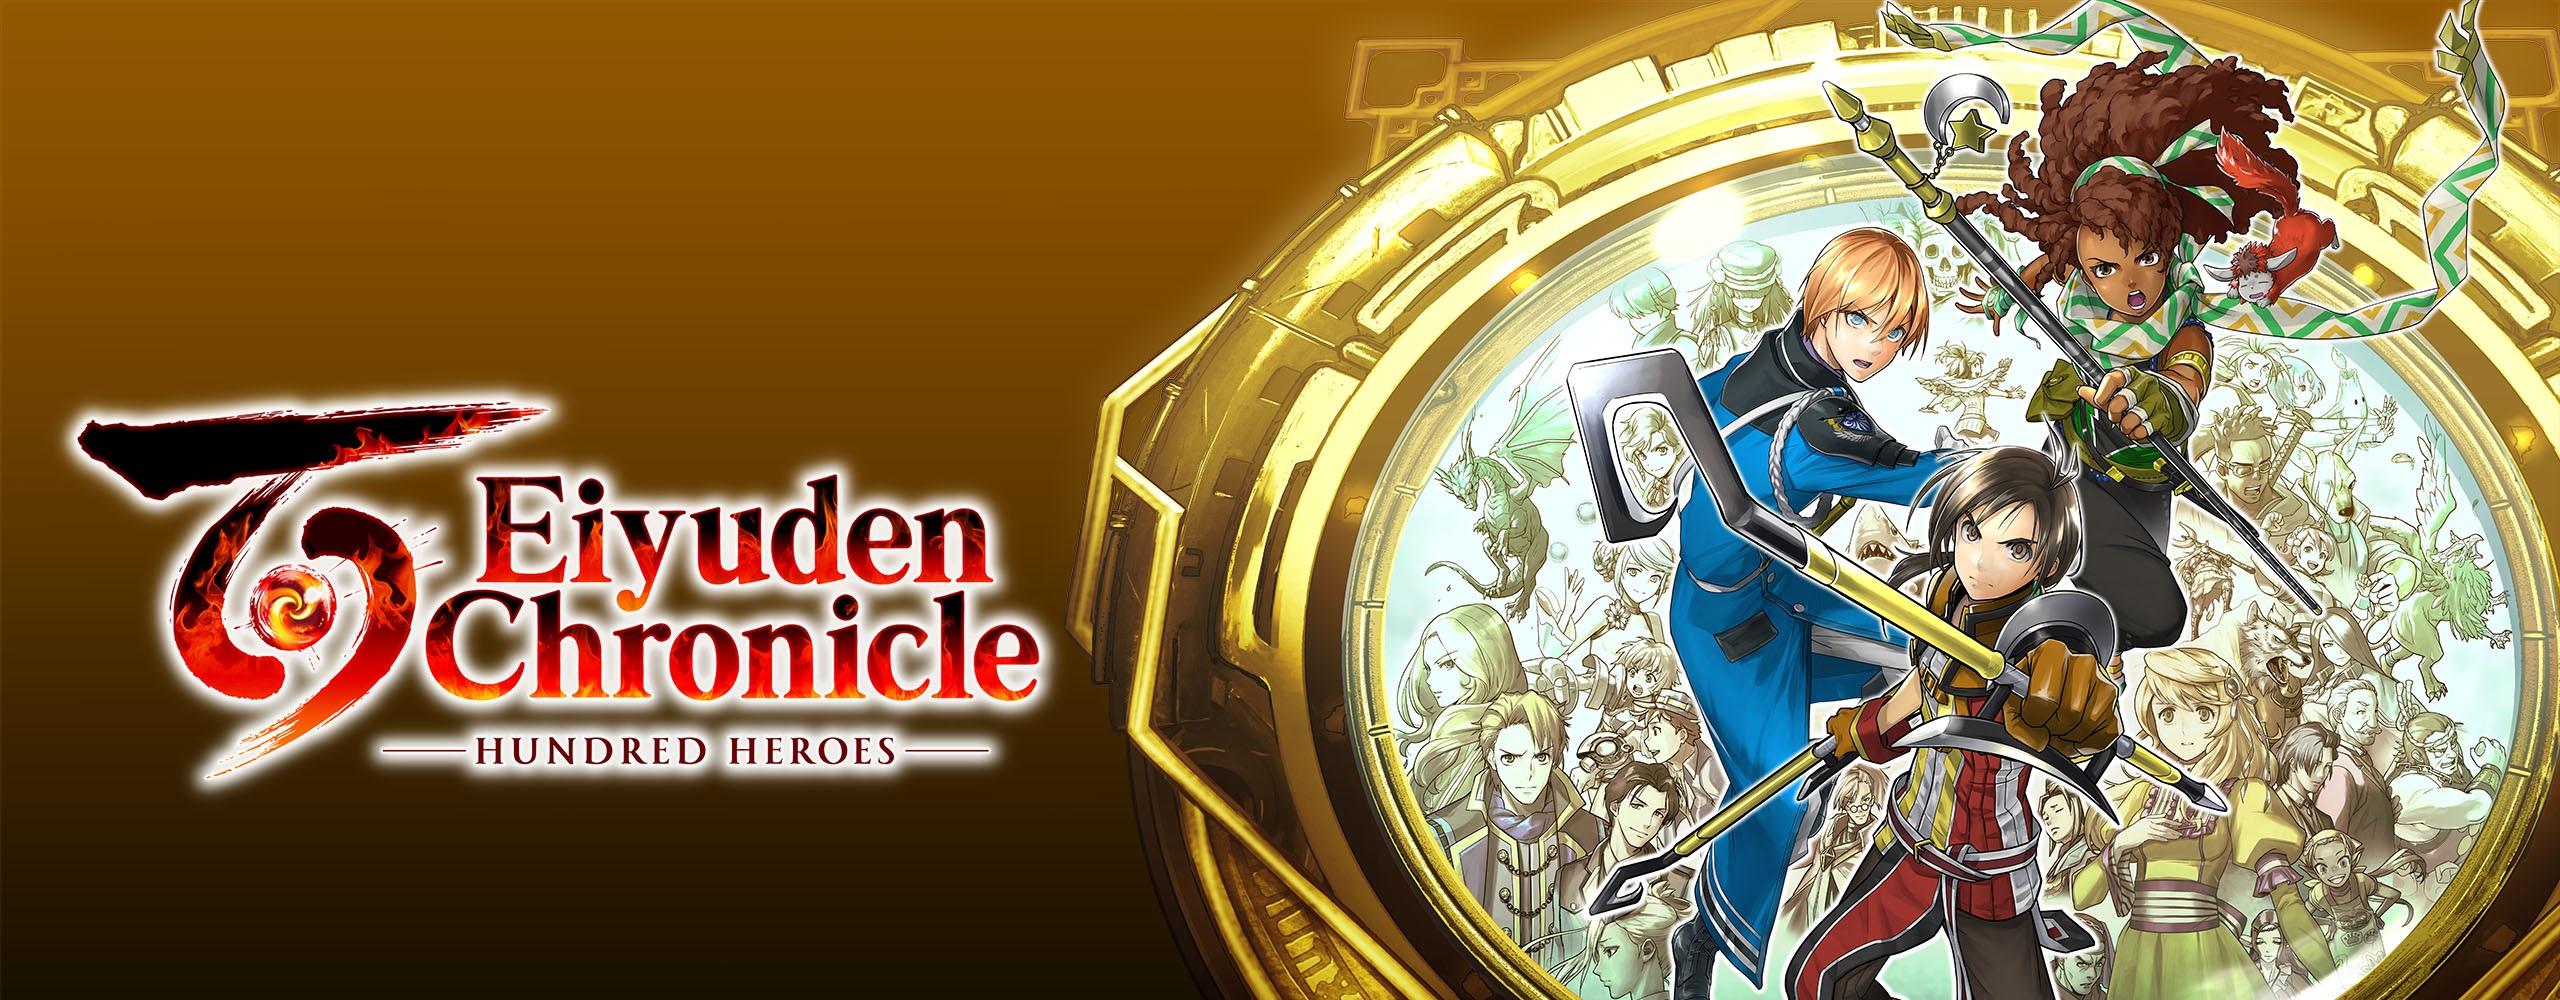 All You Need to Know About Eiyuden Chronicle: Hundred Heroes in 6 Minutes!